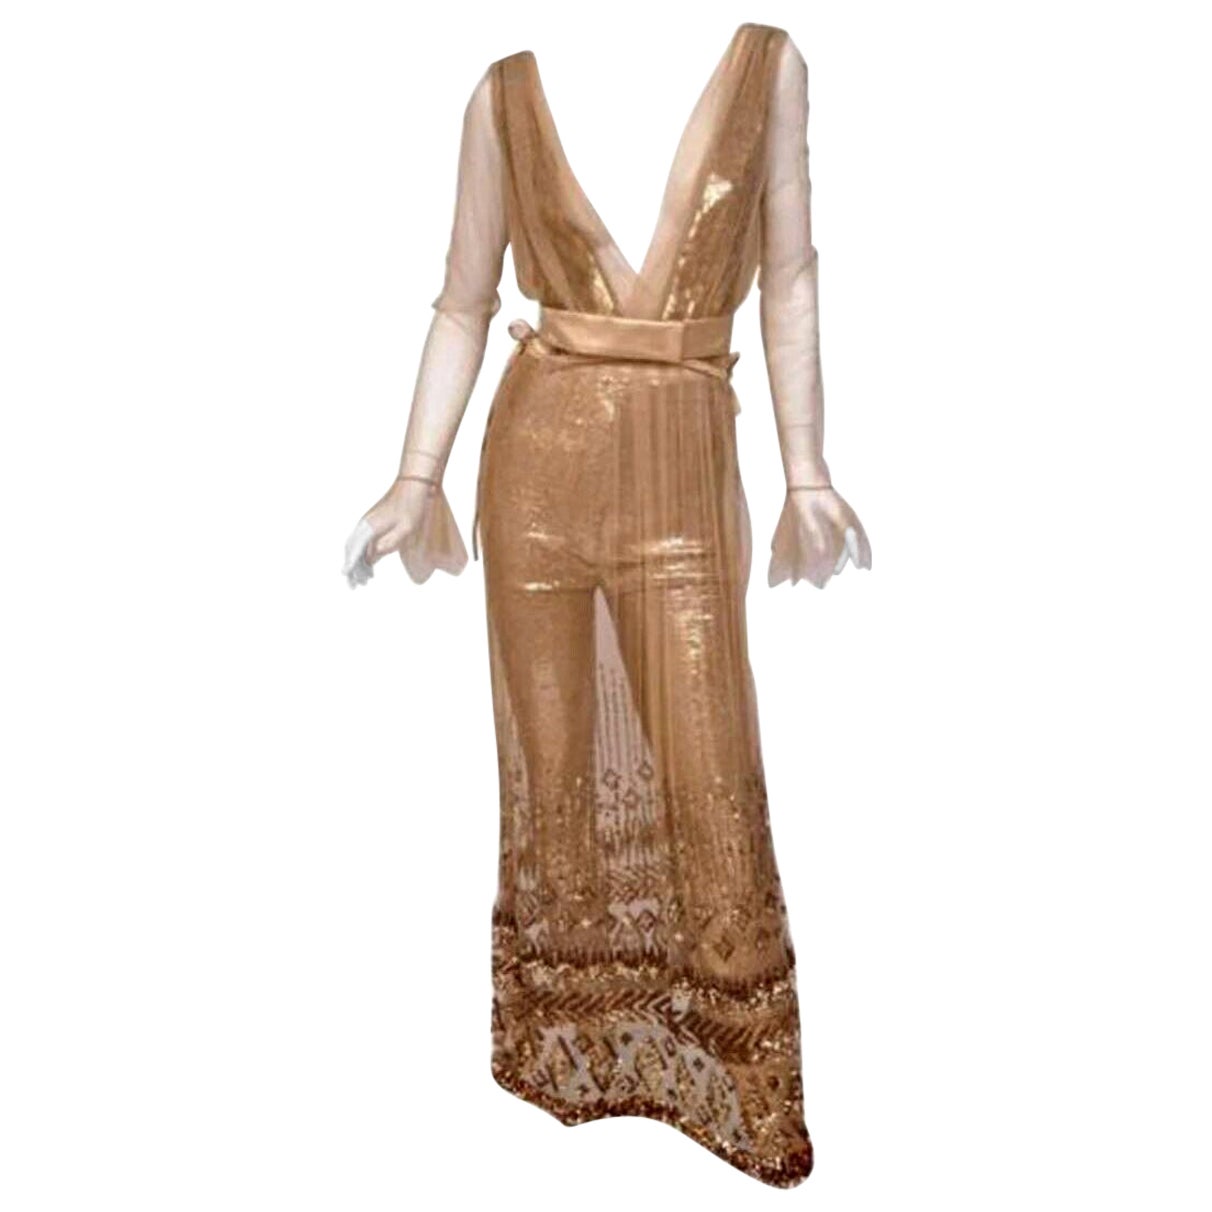 New Tom Ford Nude Embellished Chiffon Dress w/ Gold Sequin Pants 38 - 2 For Sale